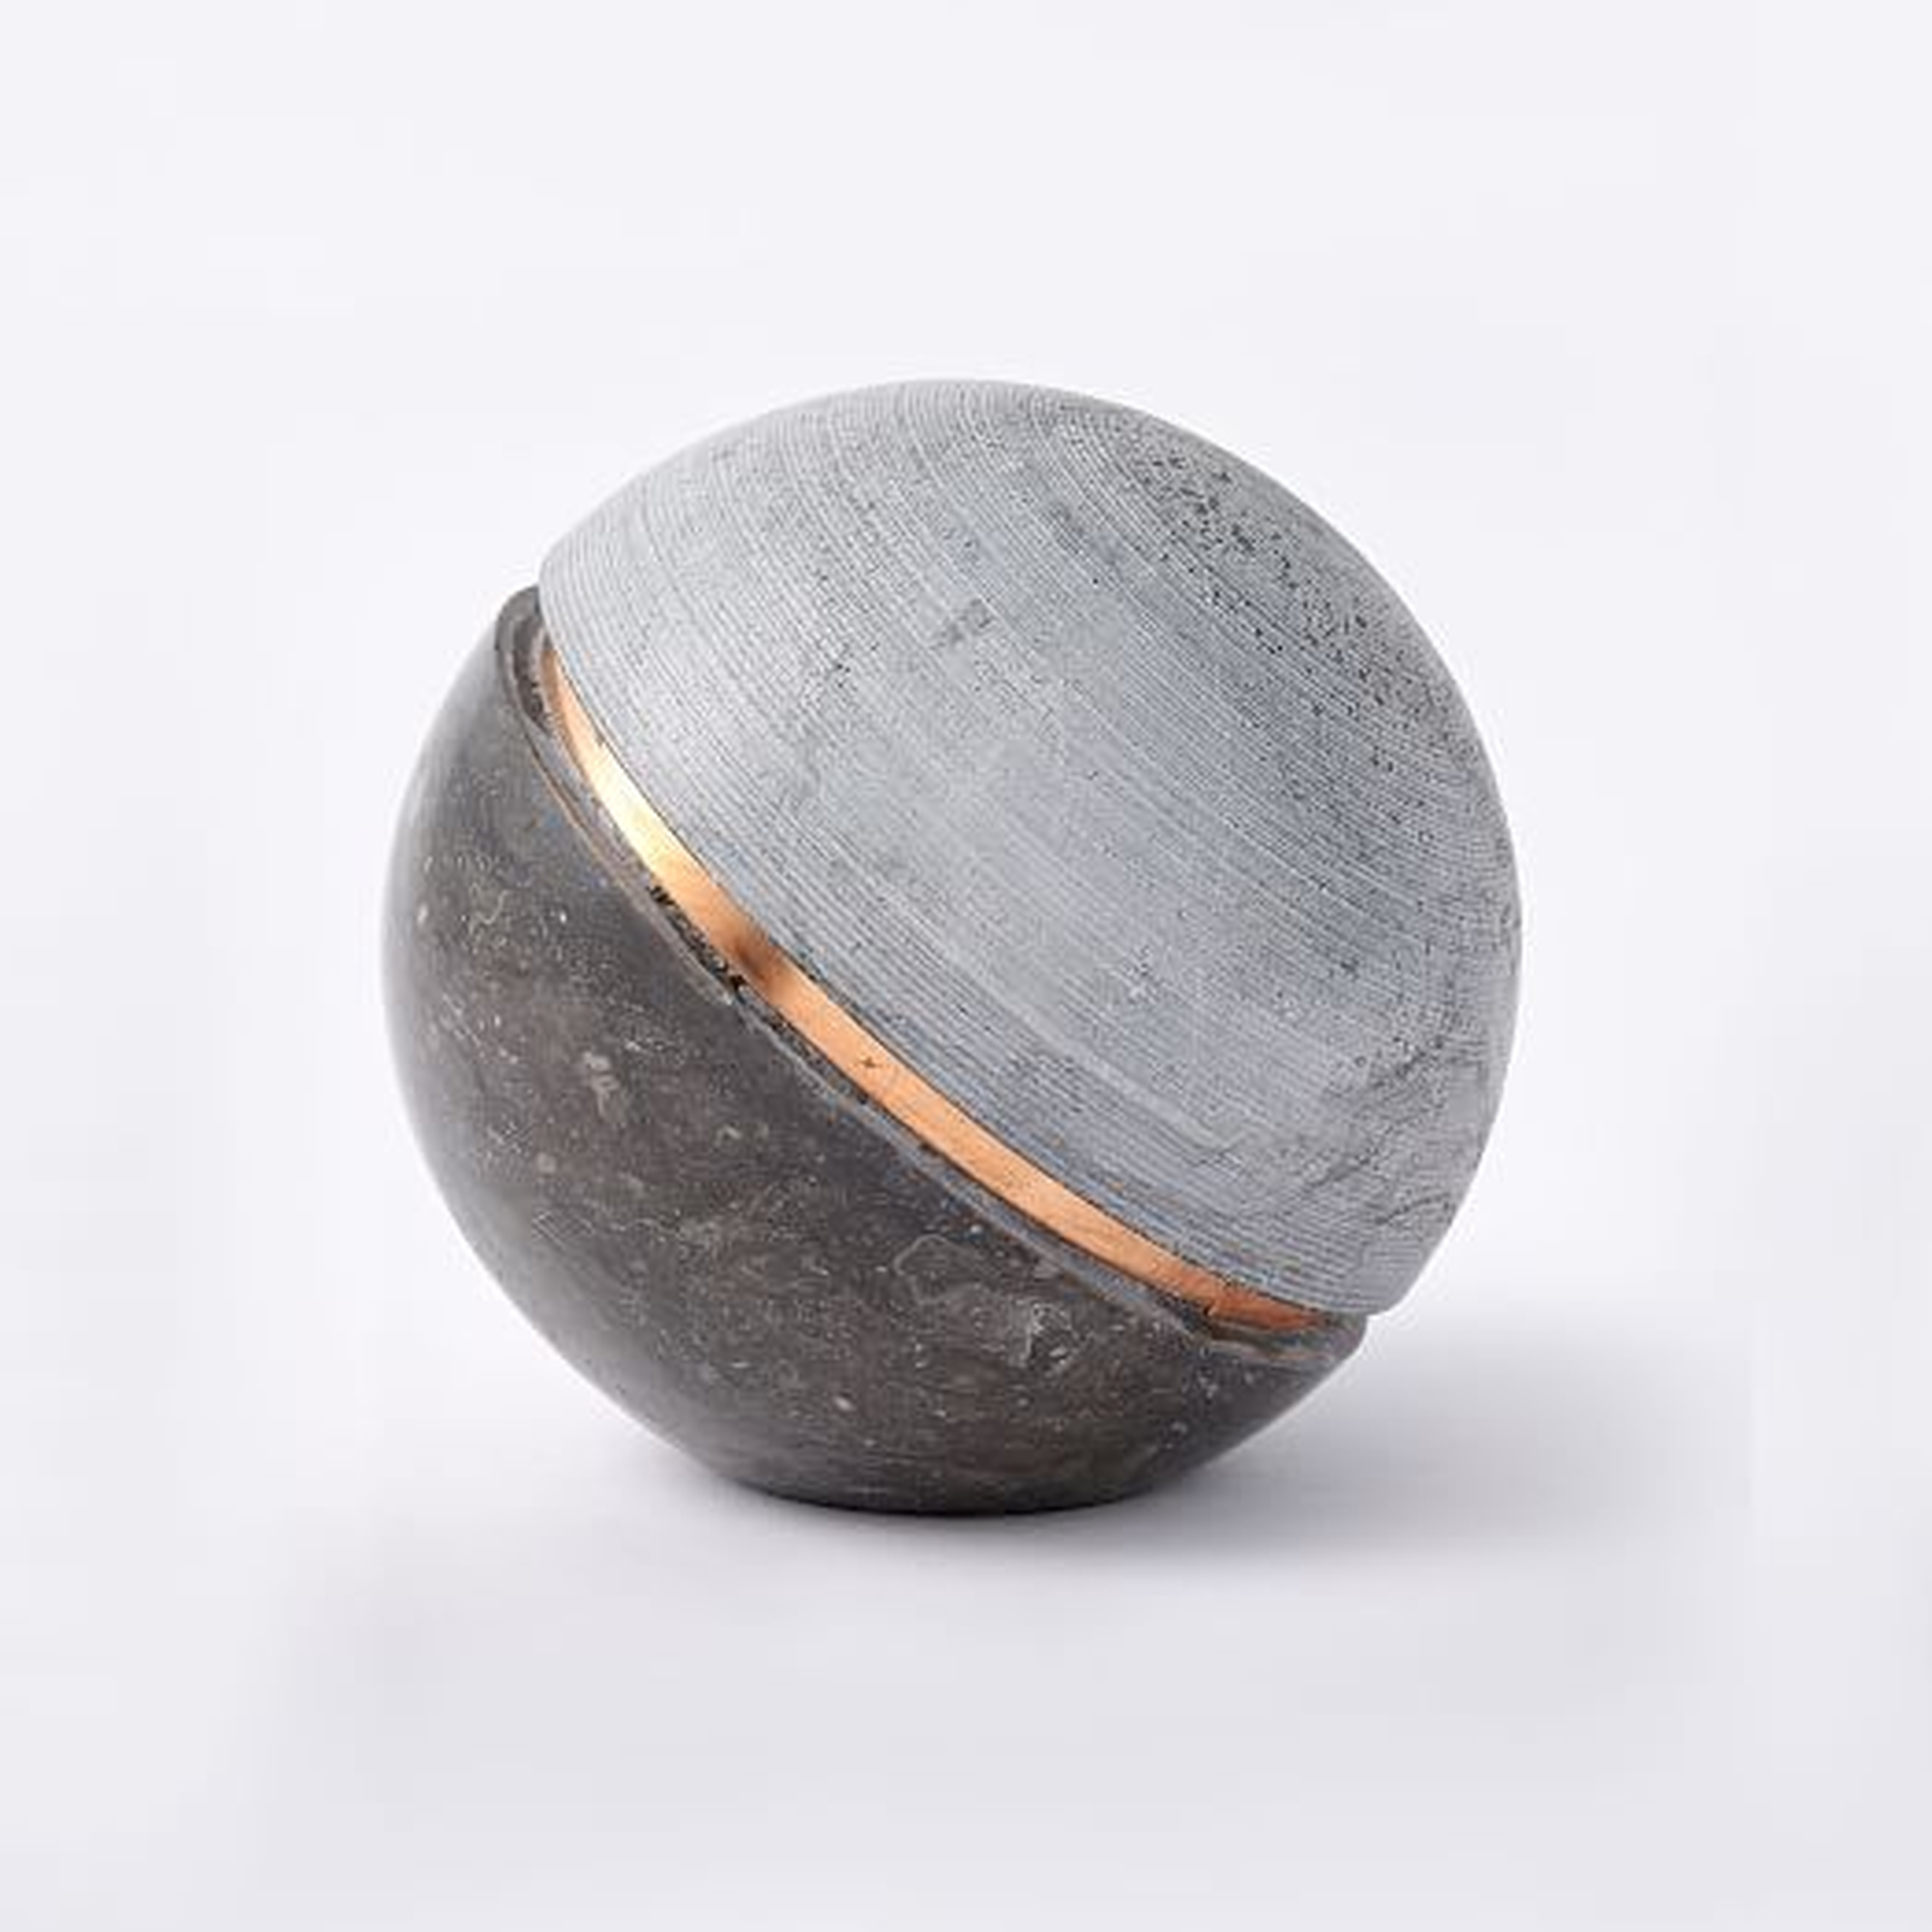 Stone Sphere Objects - West Elm